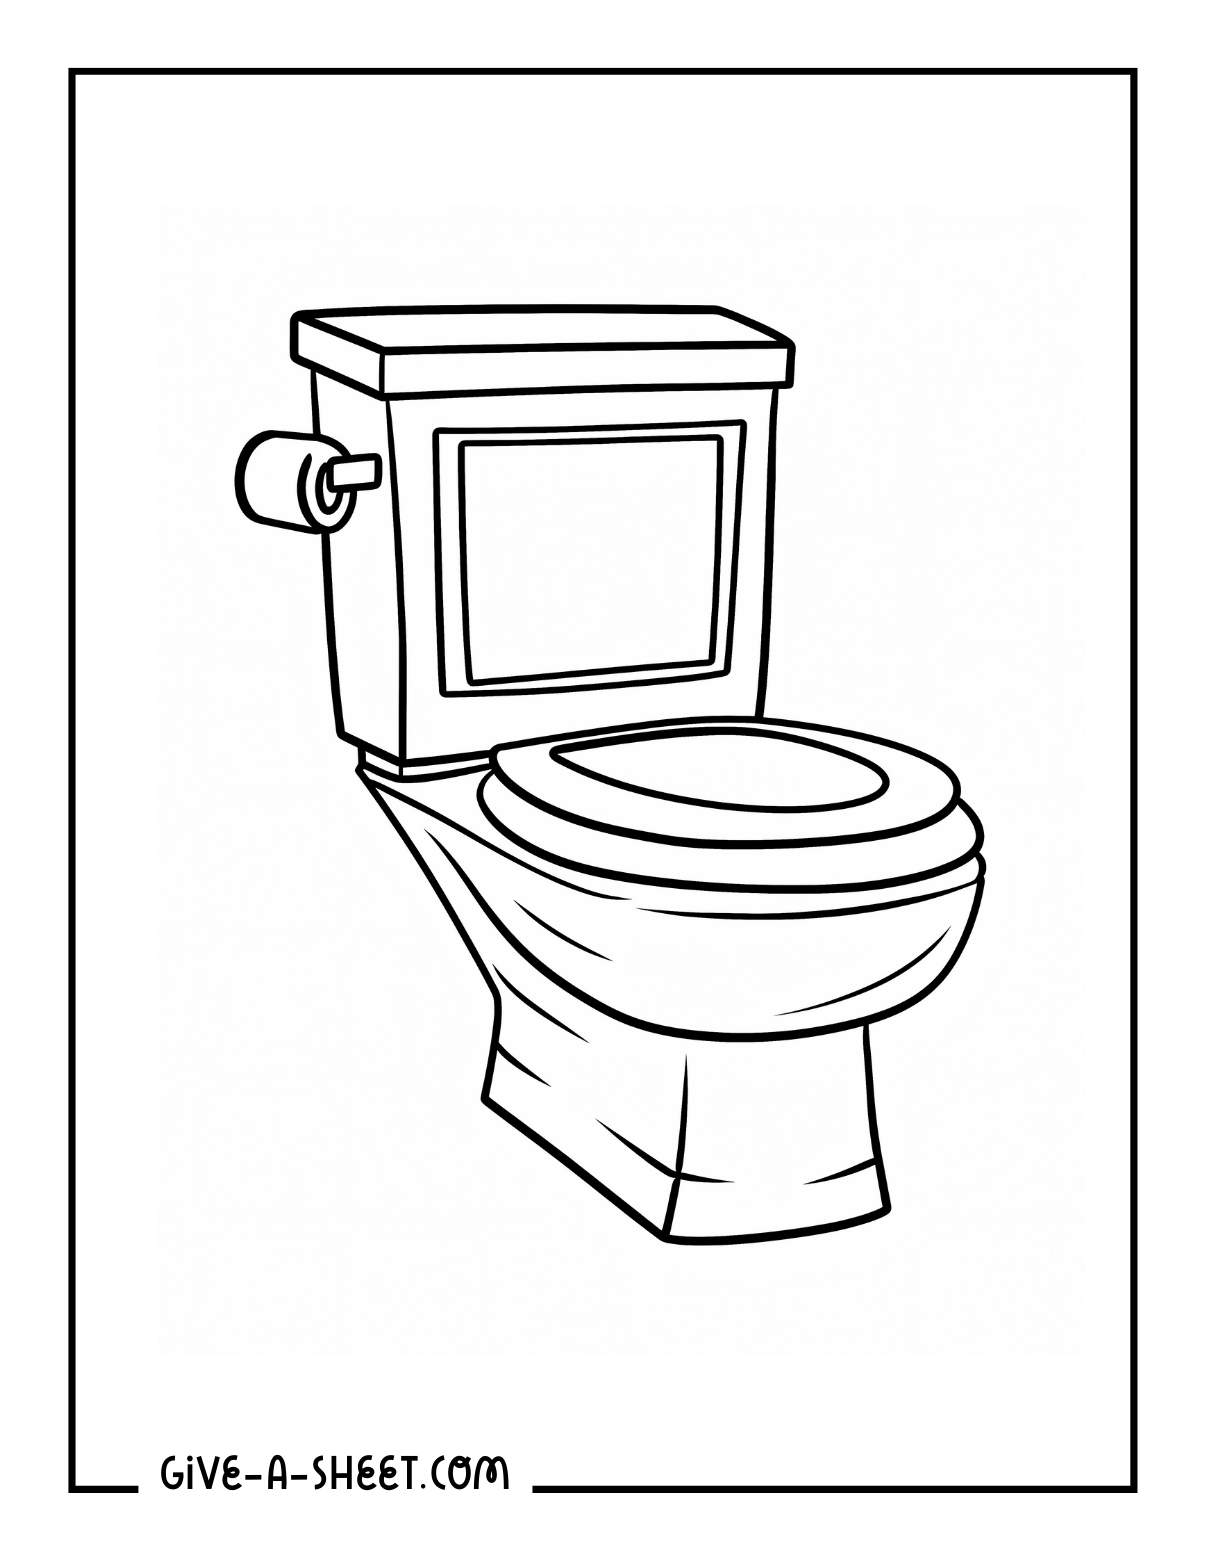 Easy toilet printable coloring pages for kids.